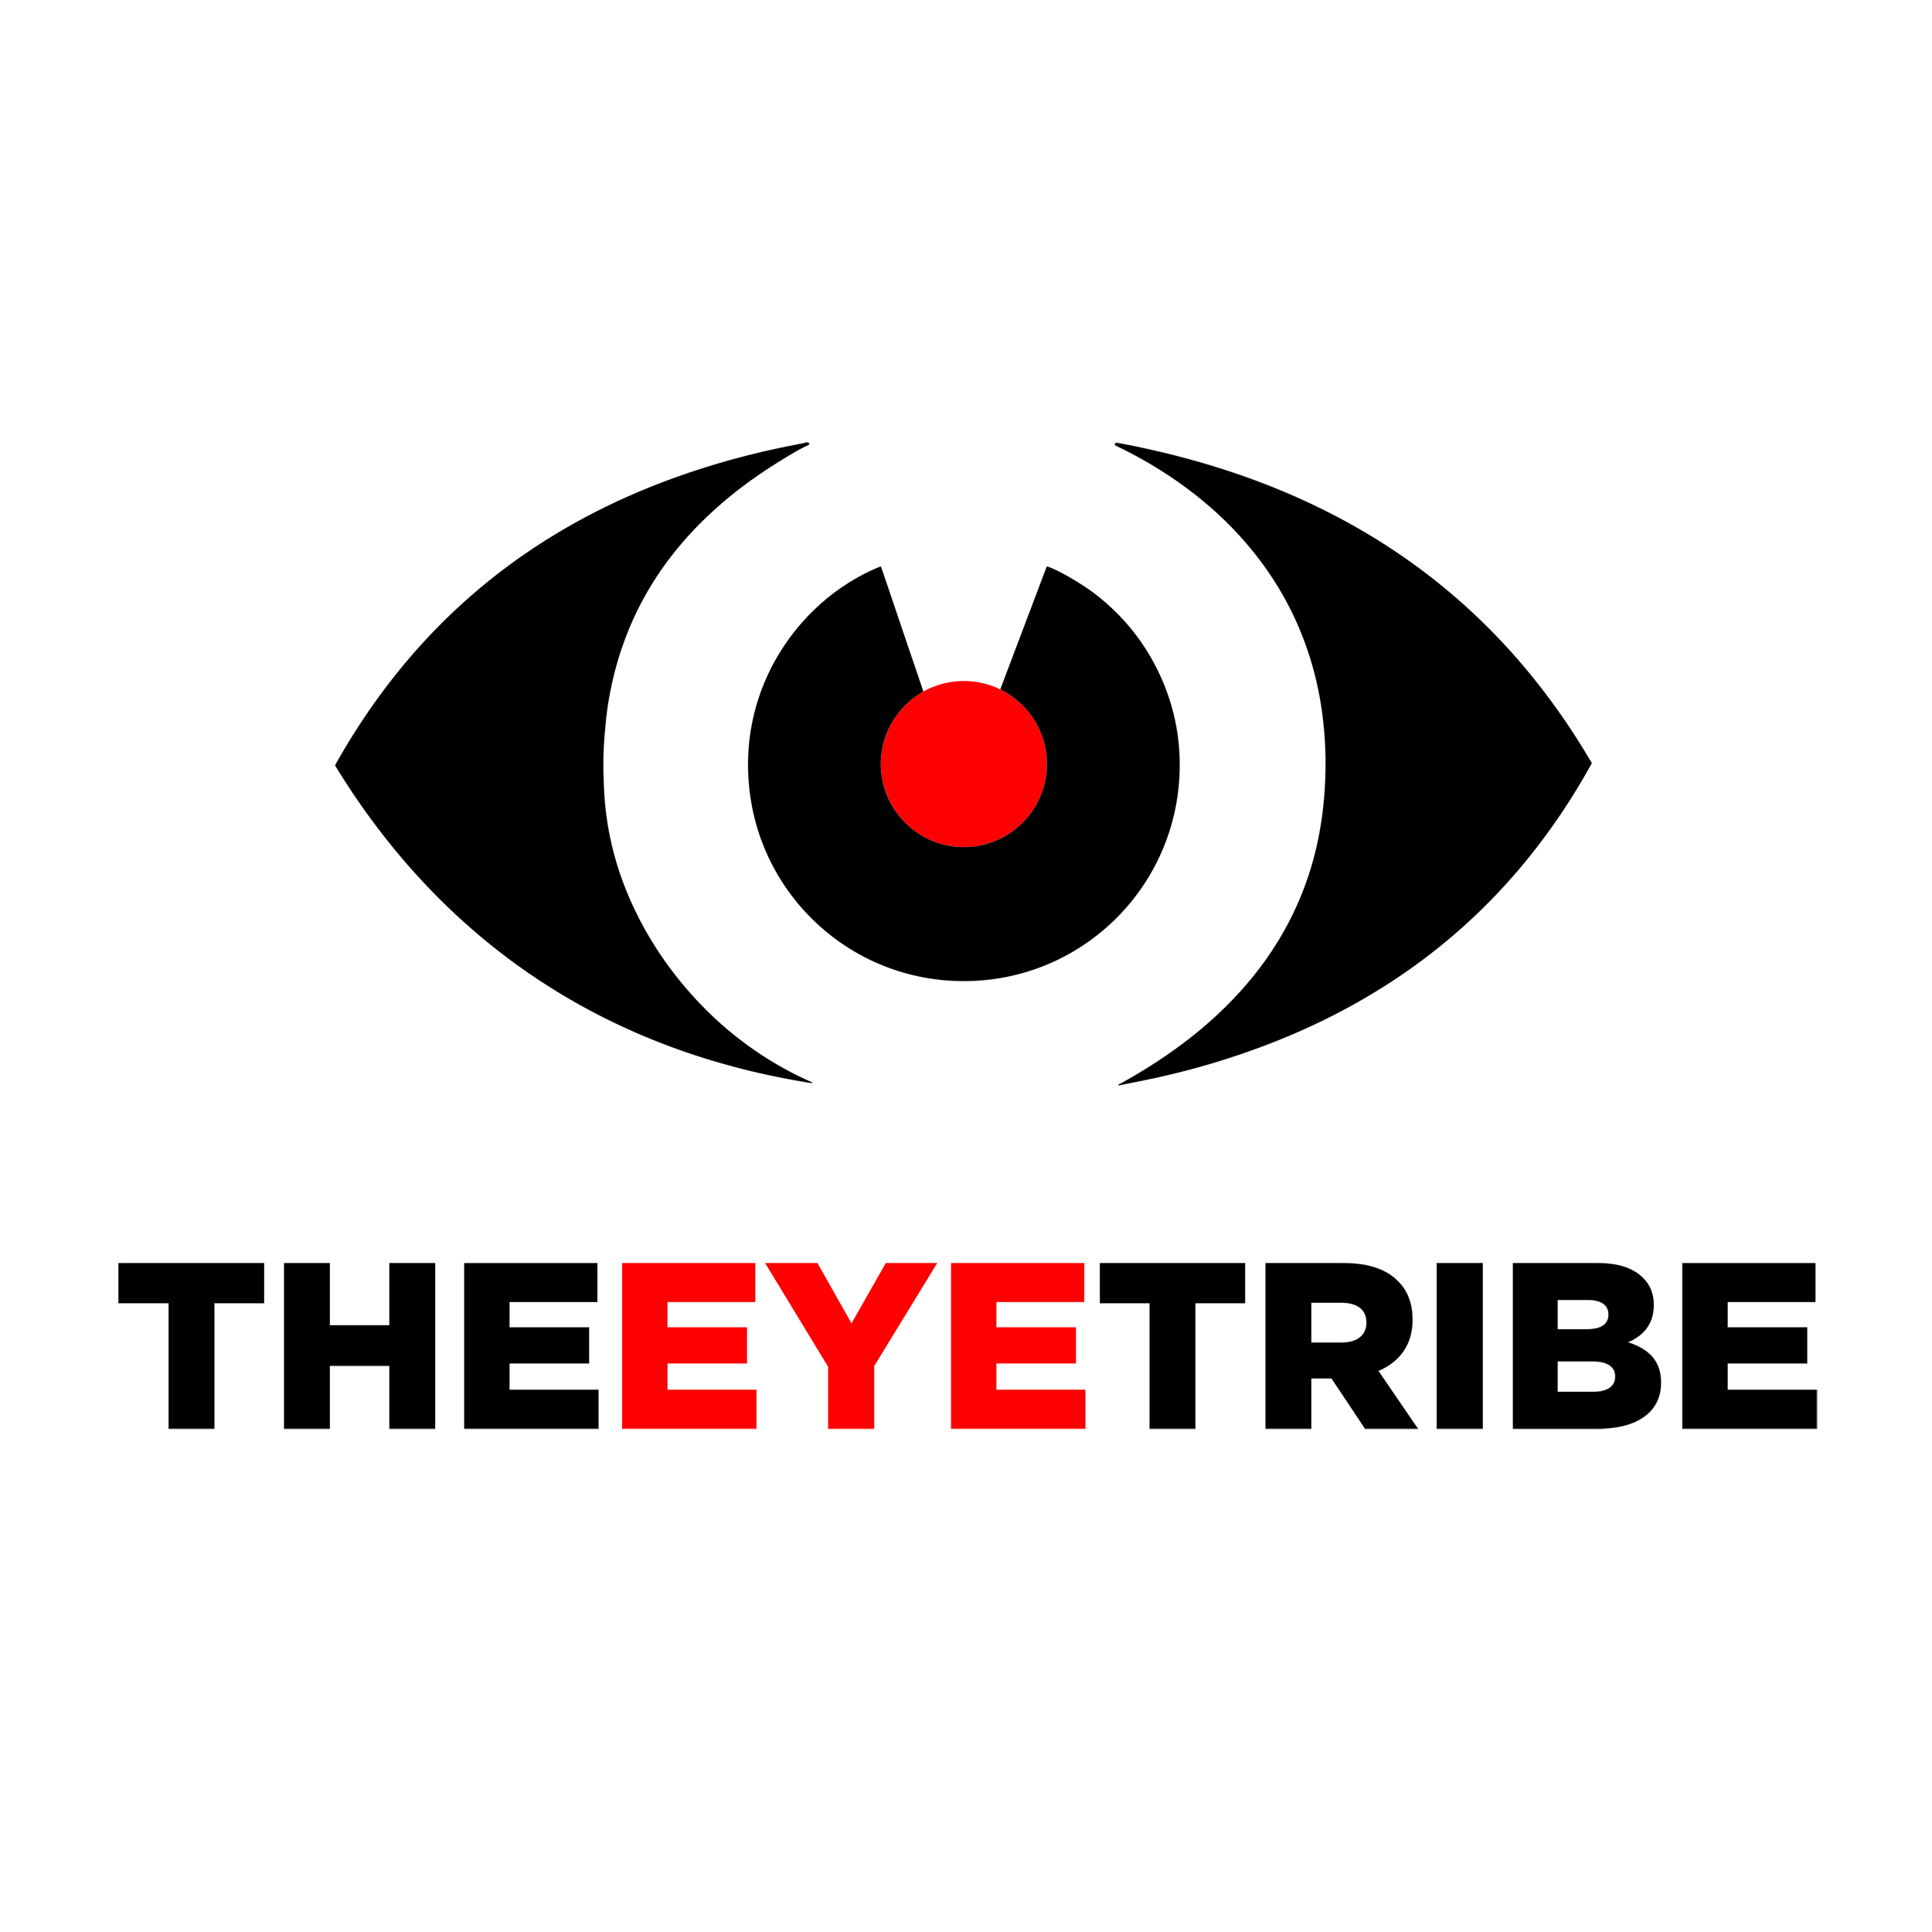 The Eye Tribe Announces Beta Release of Affordable Eye Tracking Software for Smartphones at MWC 2014